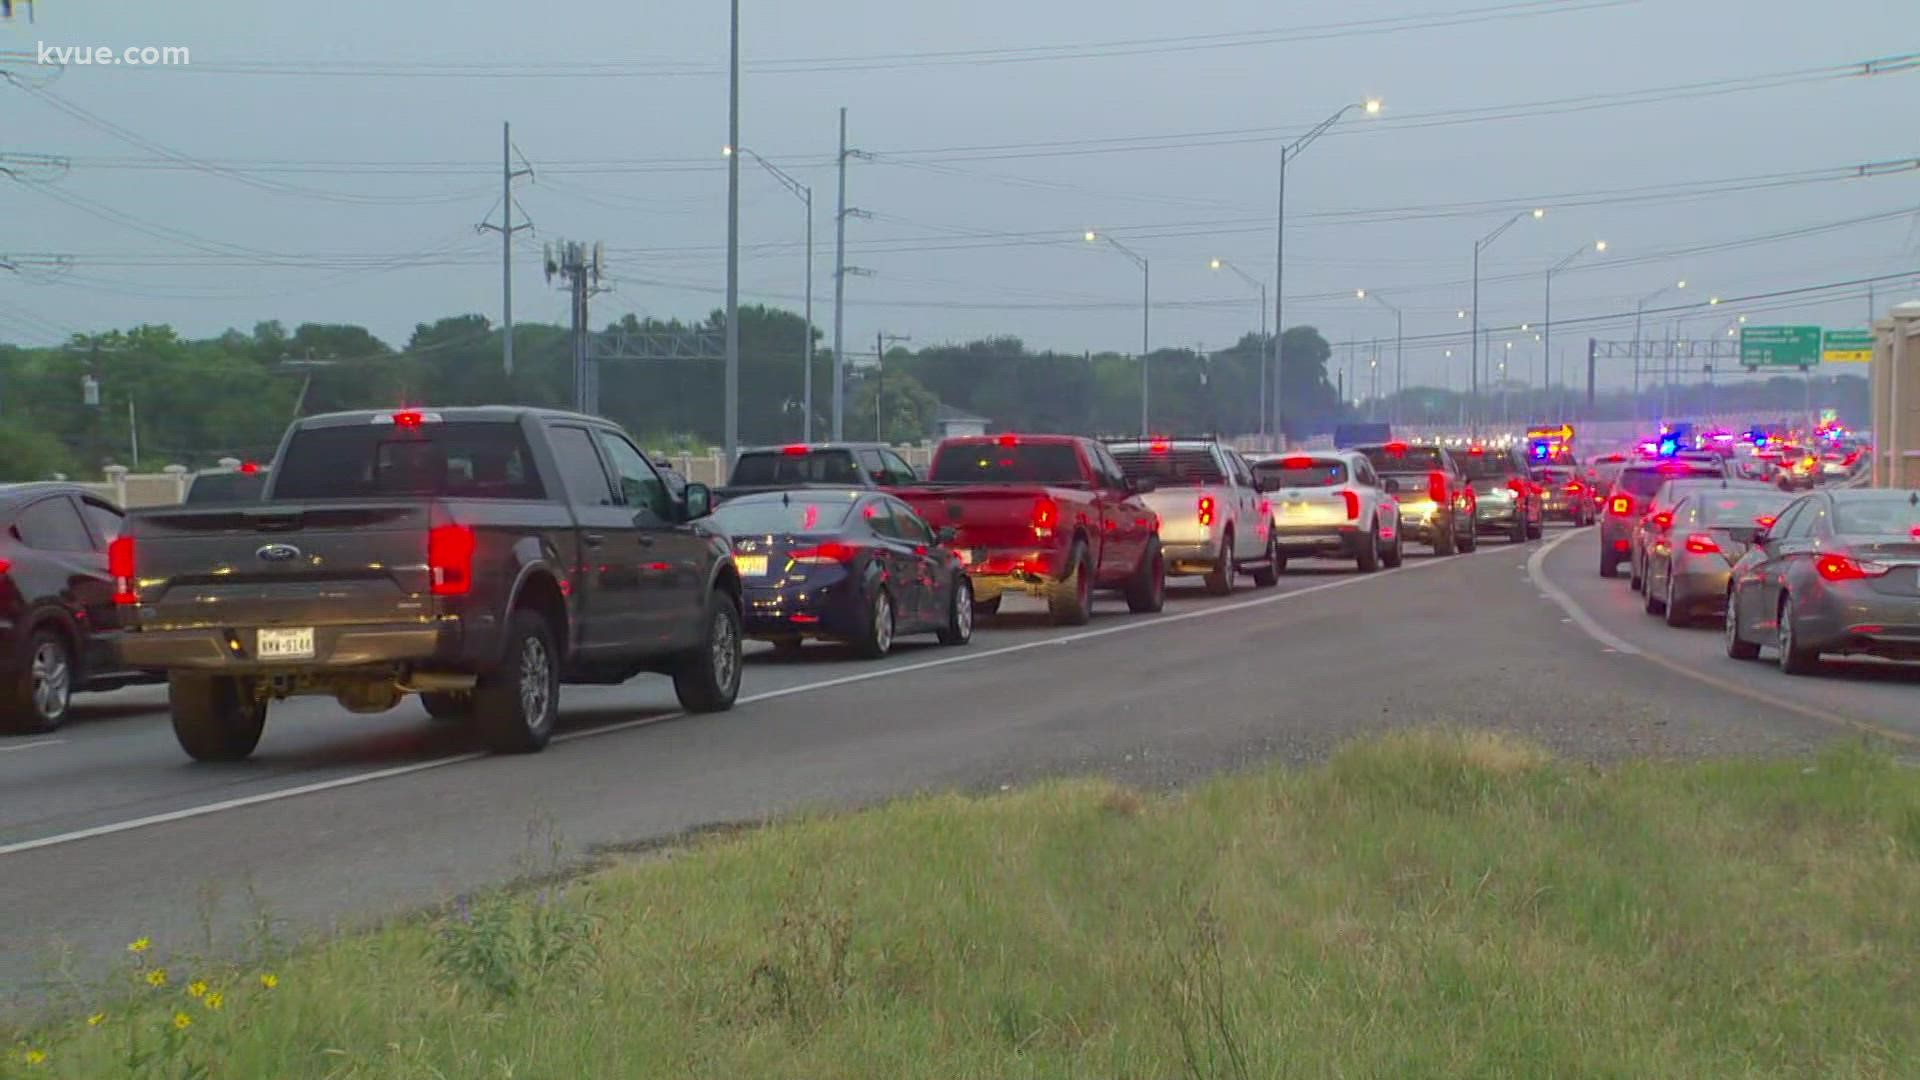 A deadly crash in North Austin has traffic backed up for miles. Dominique Newland has the details and Hannah Rucker has more on alternate routes for commuters.